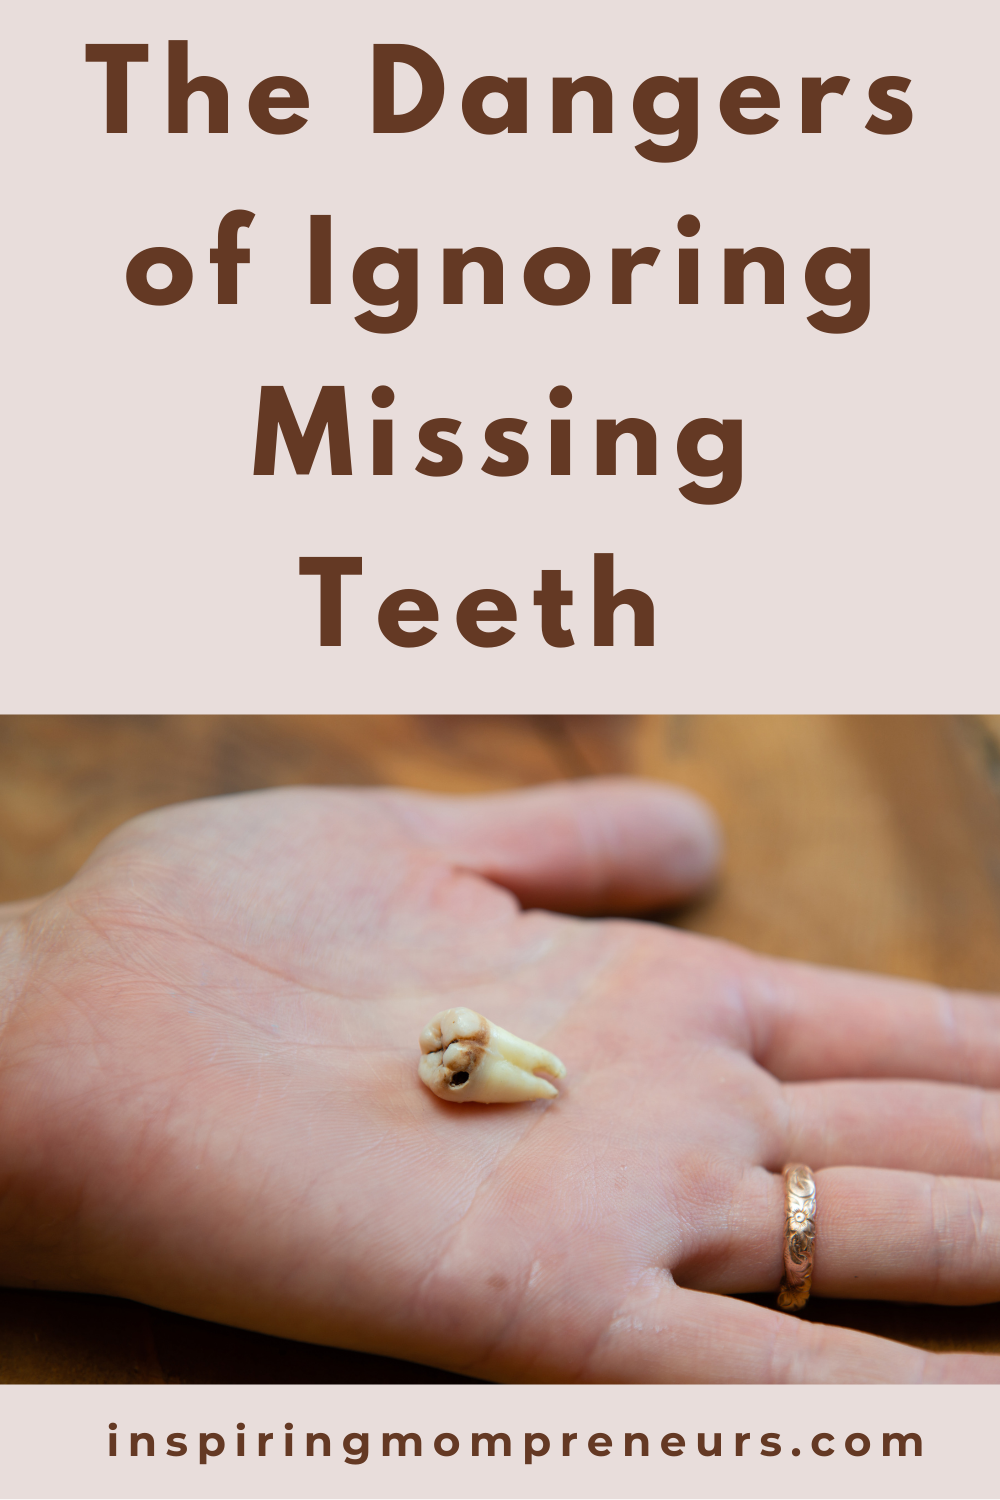 Many people err by not seeing missing teeth as a cause for concern. In fact, there are many negative consequences to losing adult teet. Here are some of them.